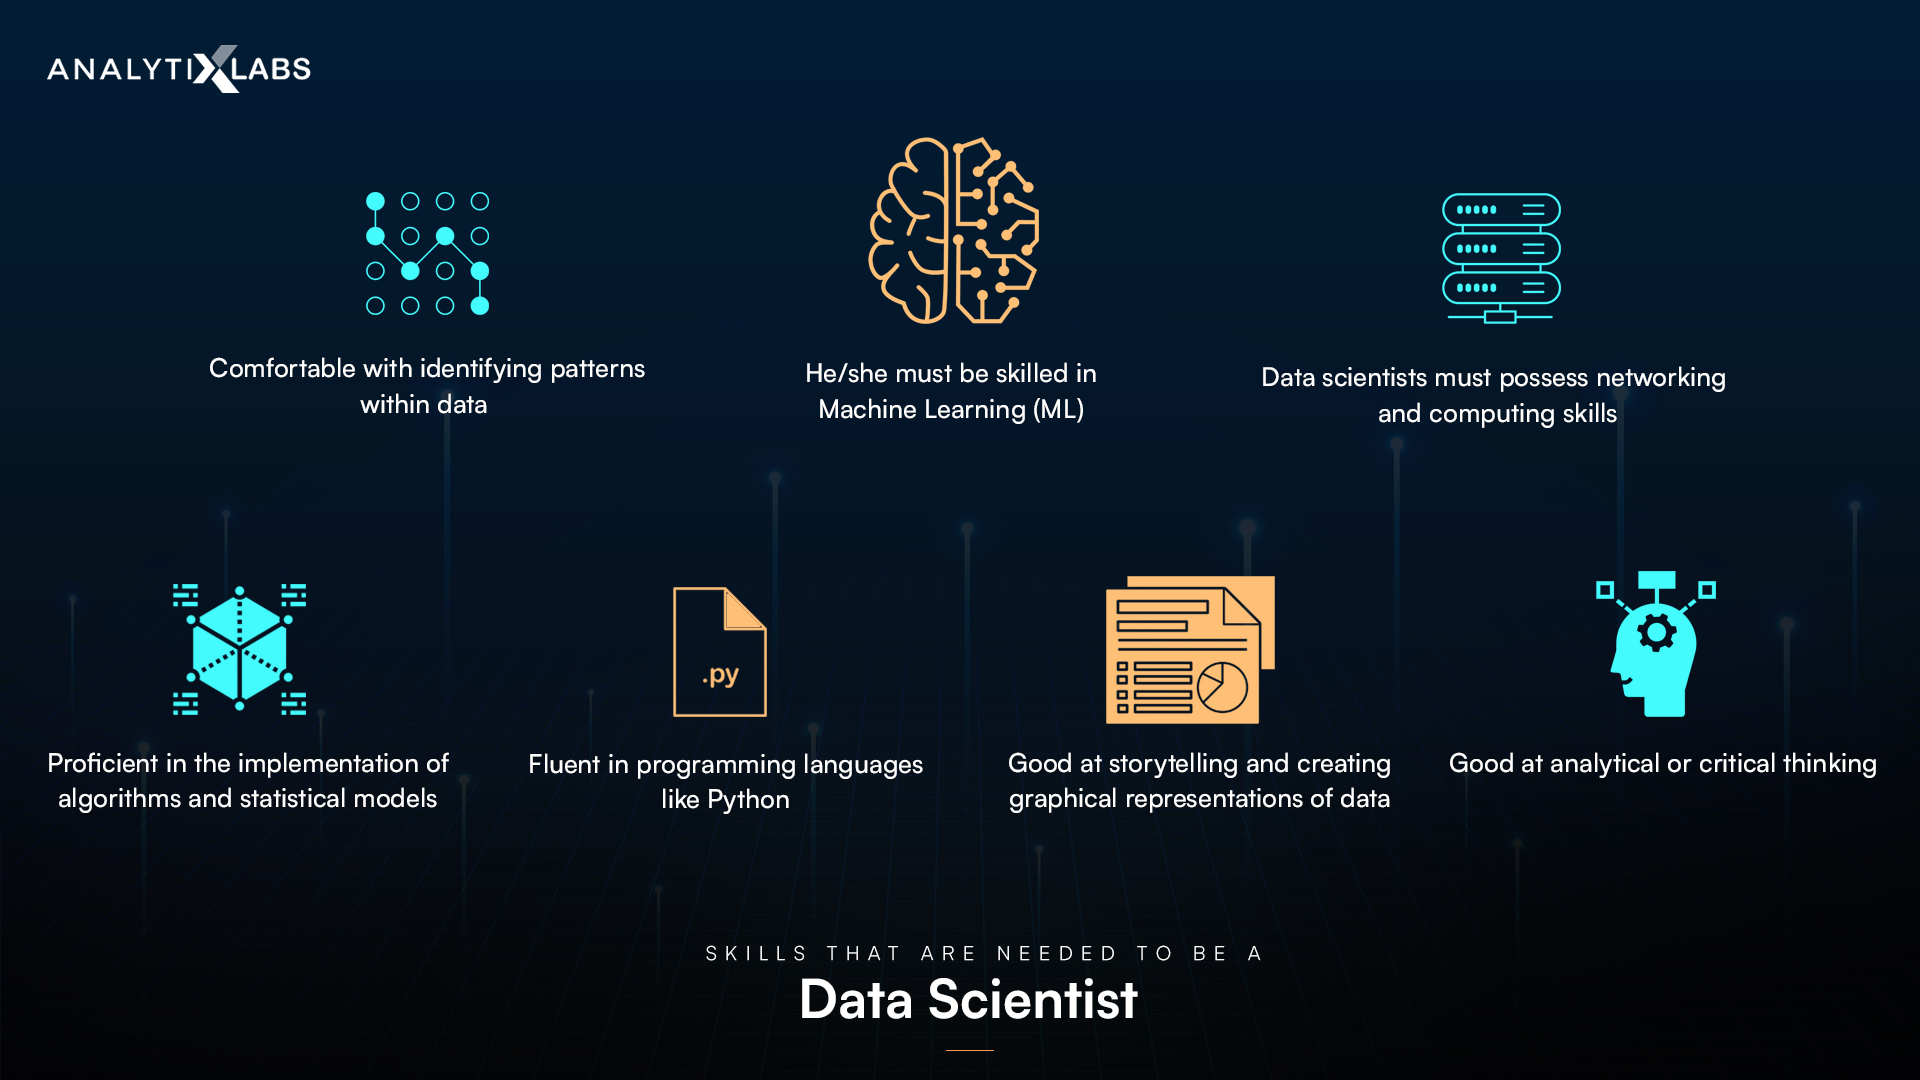 What Skills Are Needed to Be a Data Scientist